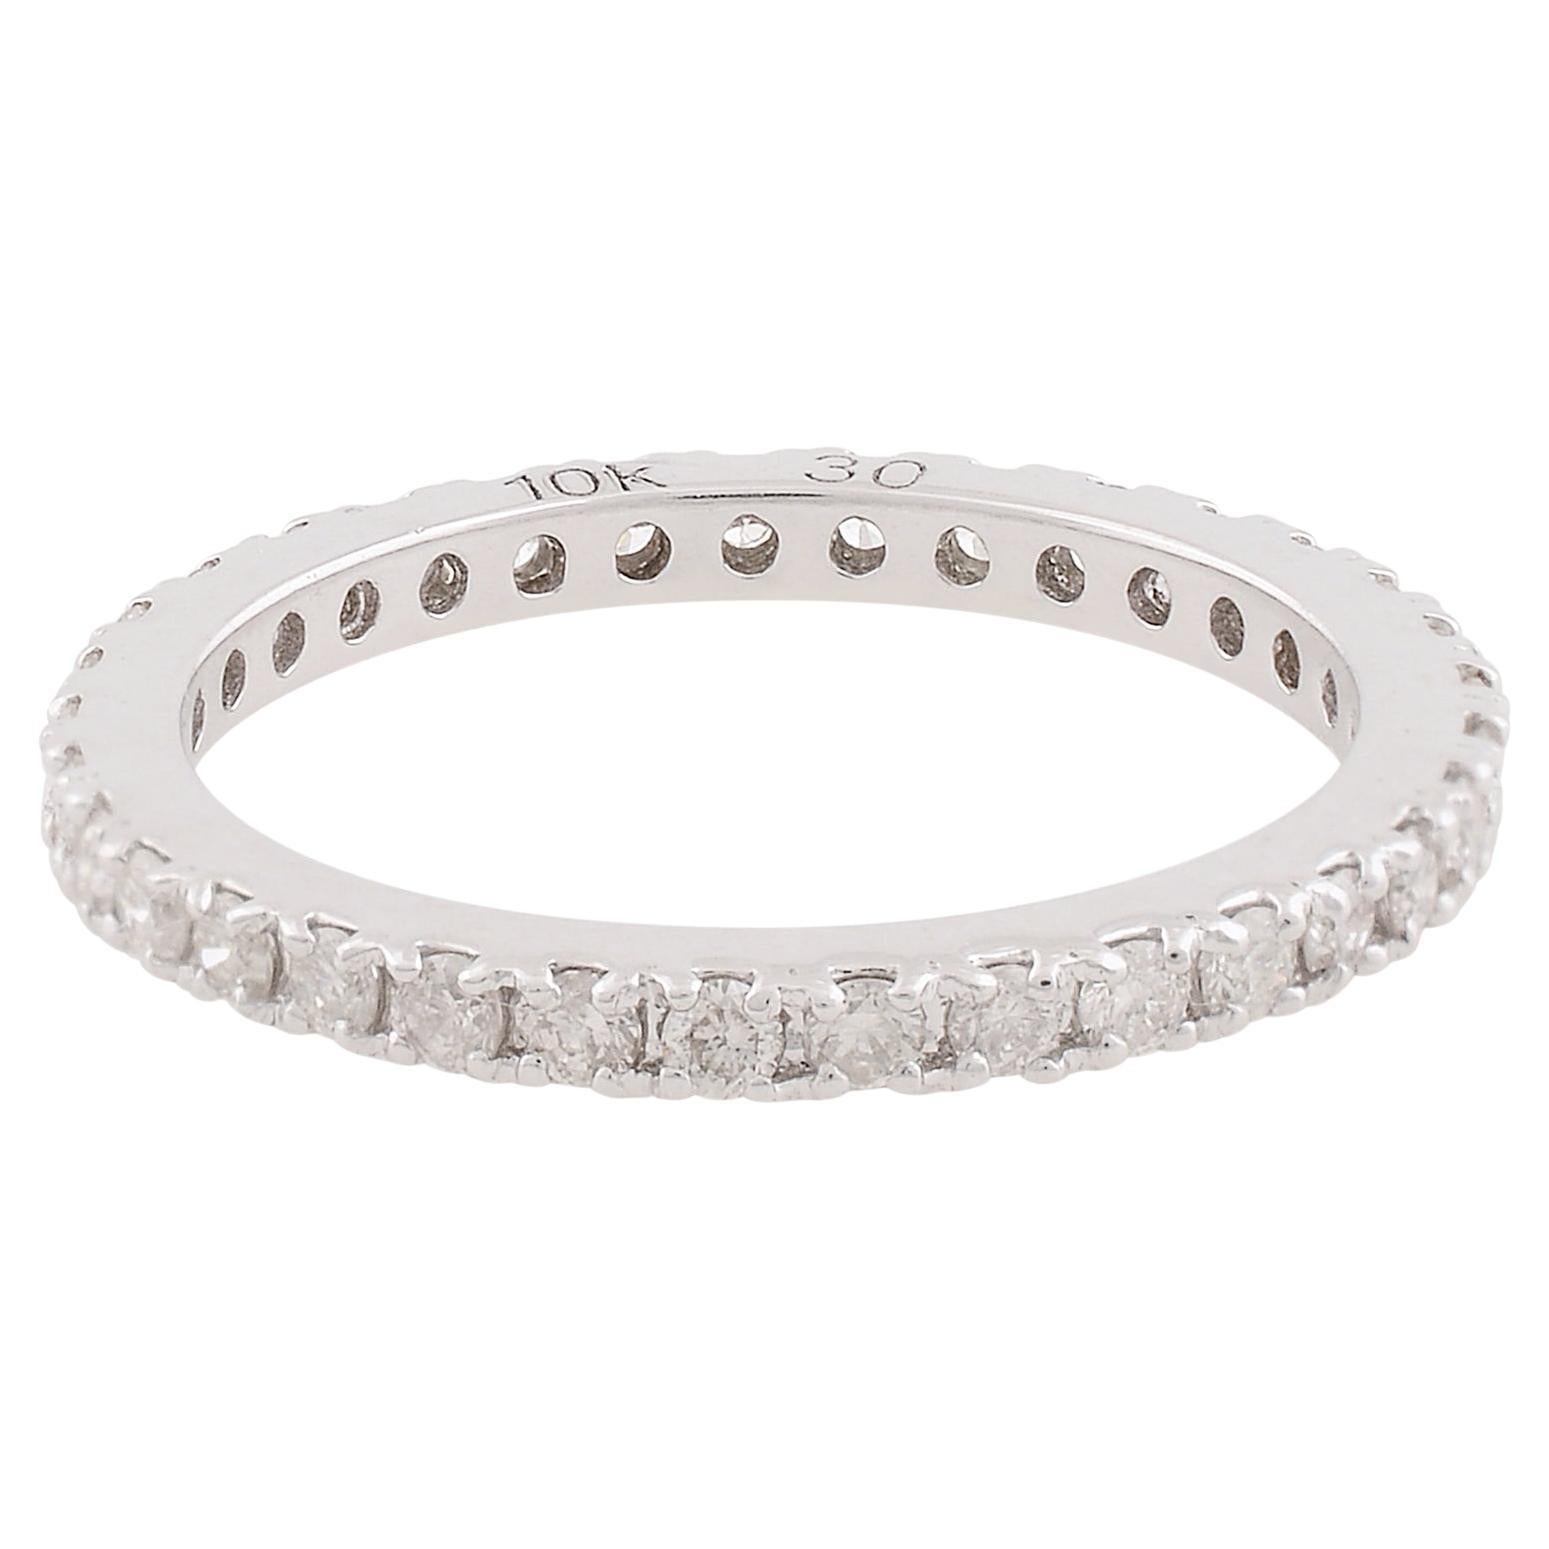 For Sale:  0.63 Carat Pave Diamond Eternity Band Ring Solid 10k White Gold Jewelry